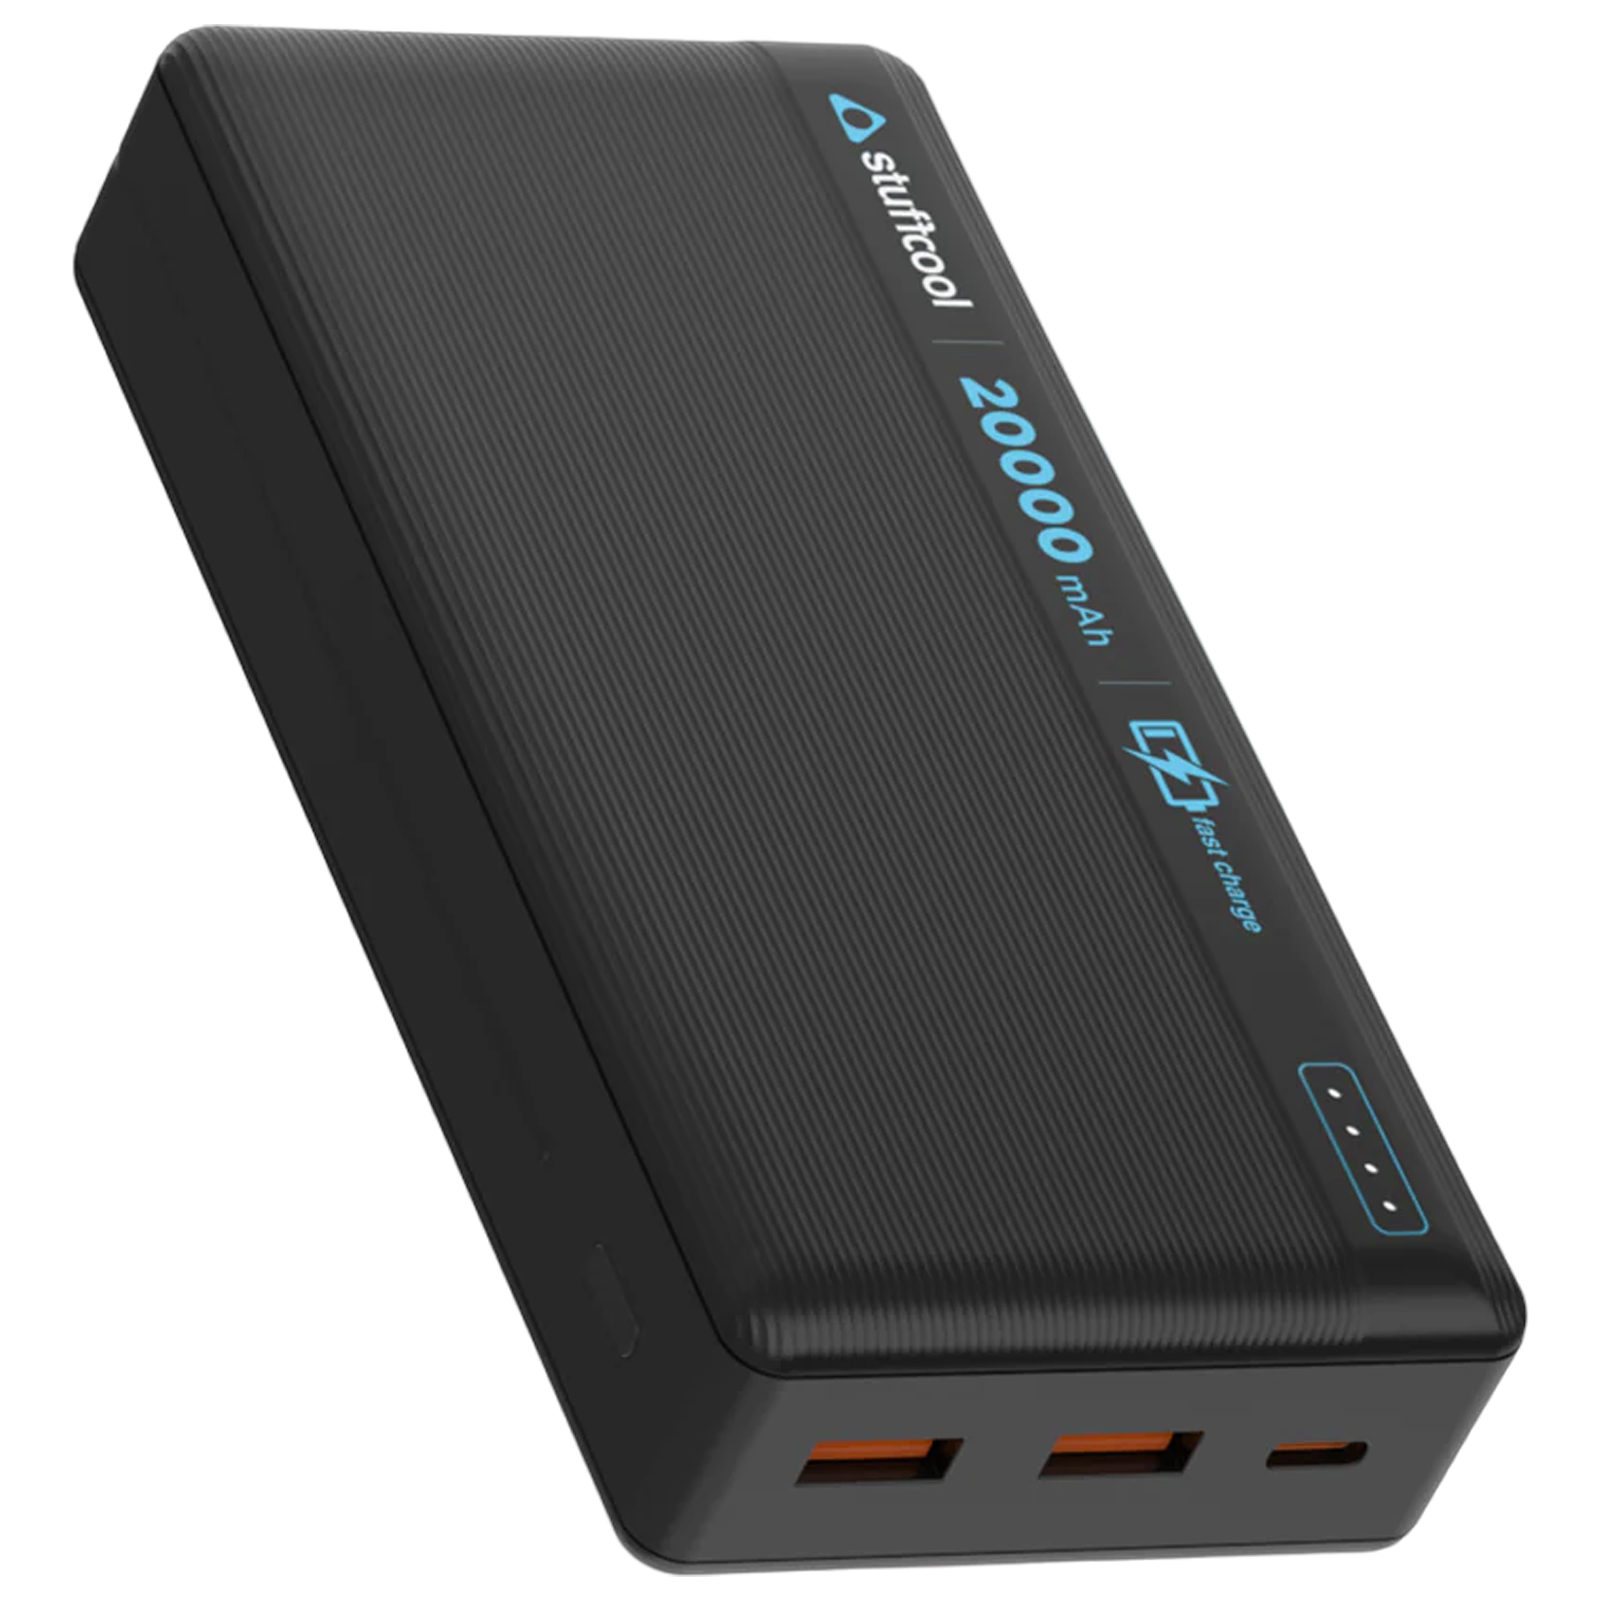 stuffcool Major Plus 20000 mAh 22.5W Fast Charging Power Bank (2 Type A, 1 Micro USB and 1 Type C Port, Short Circuit Protection, Black)